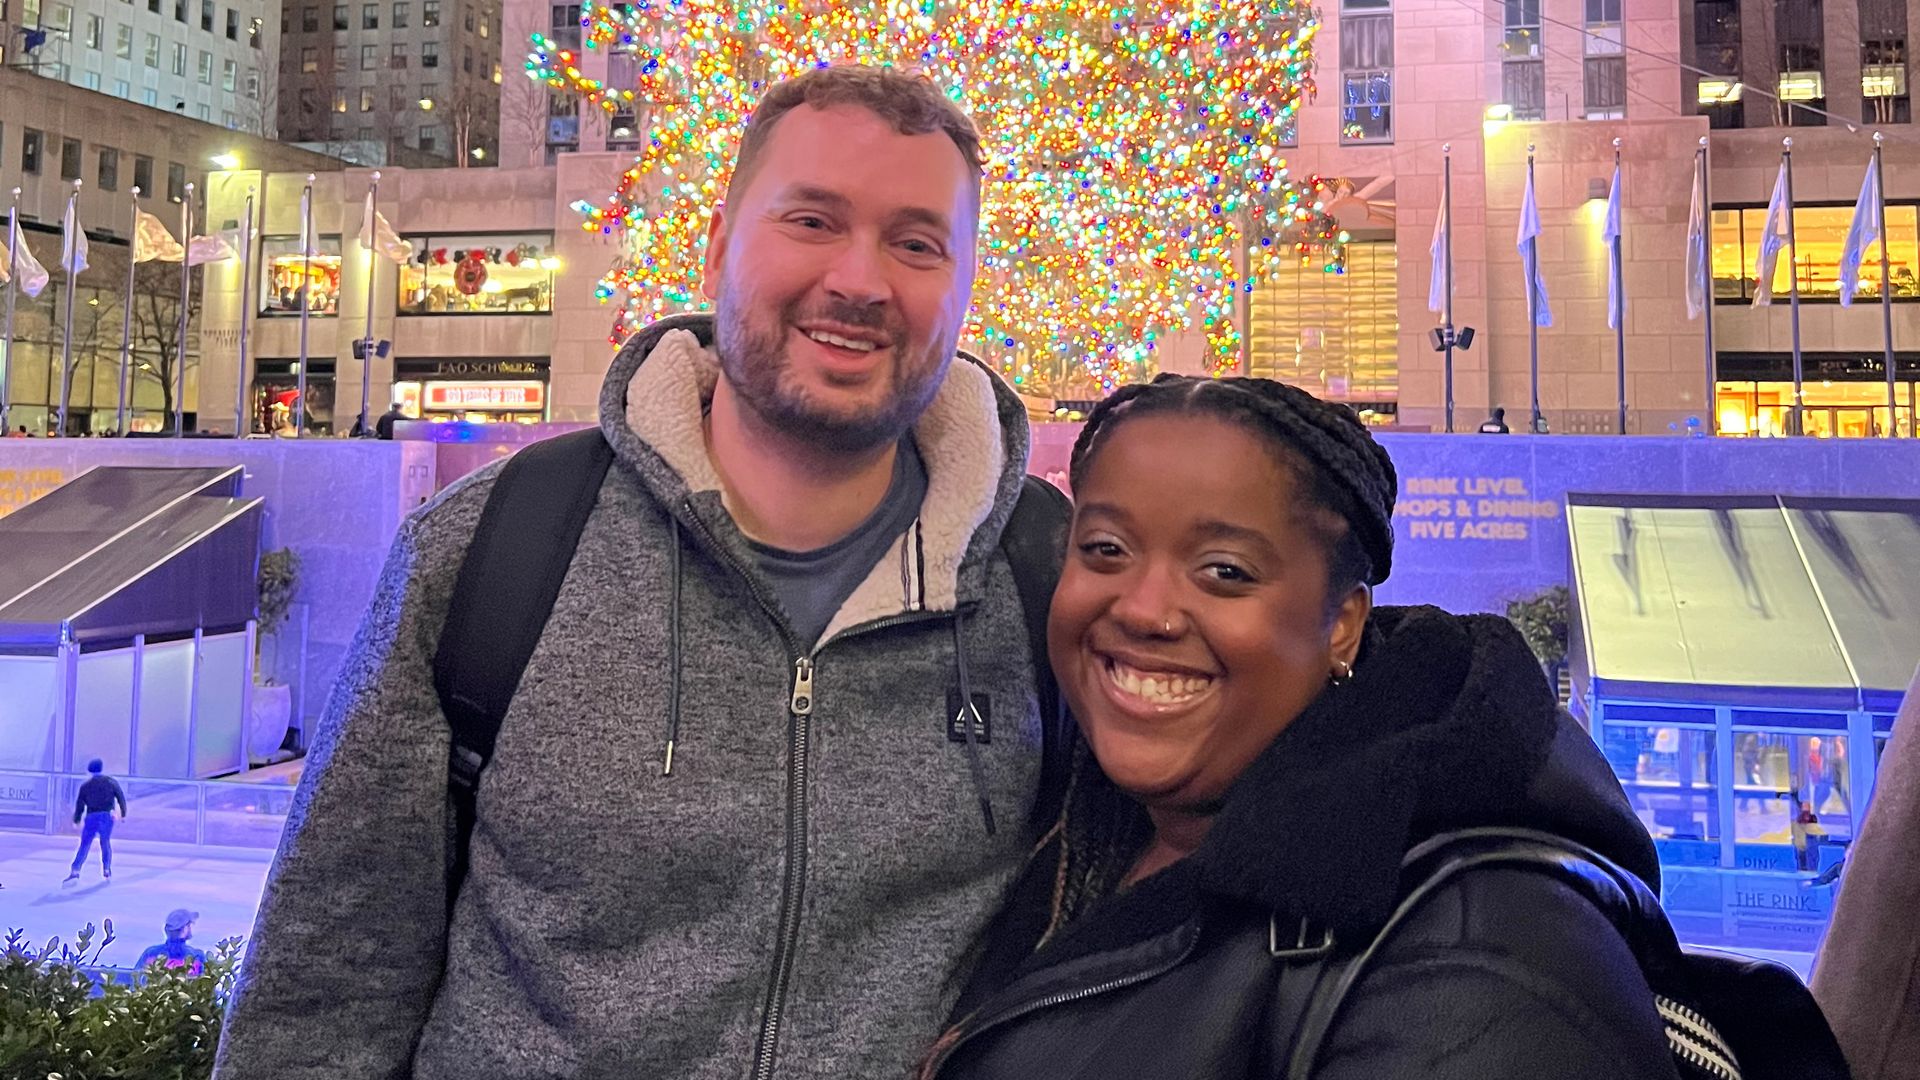 Young man and woman smiling in New York in front of a Christmas tree